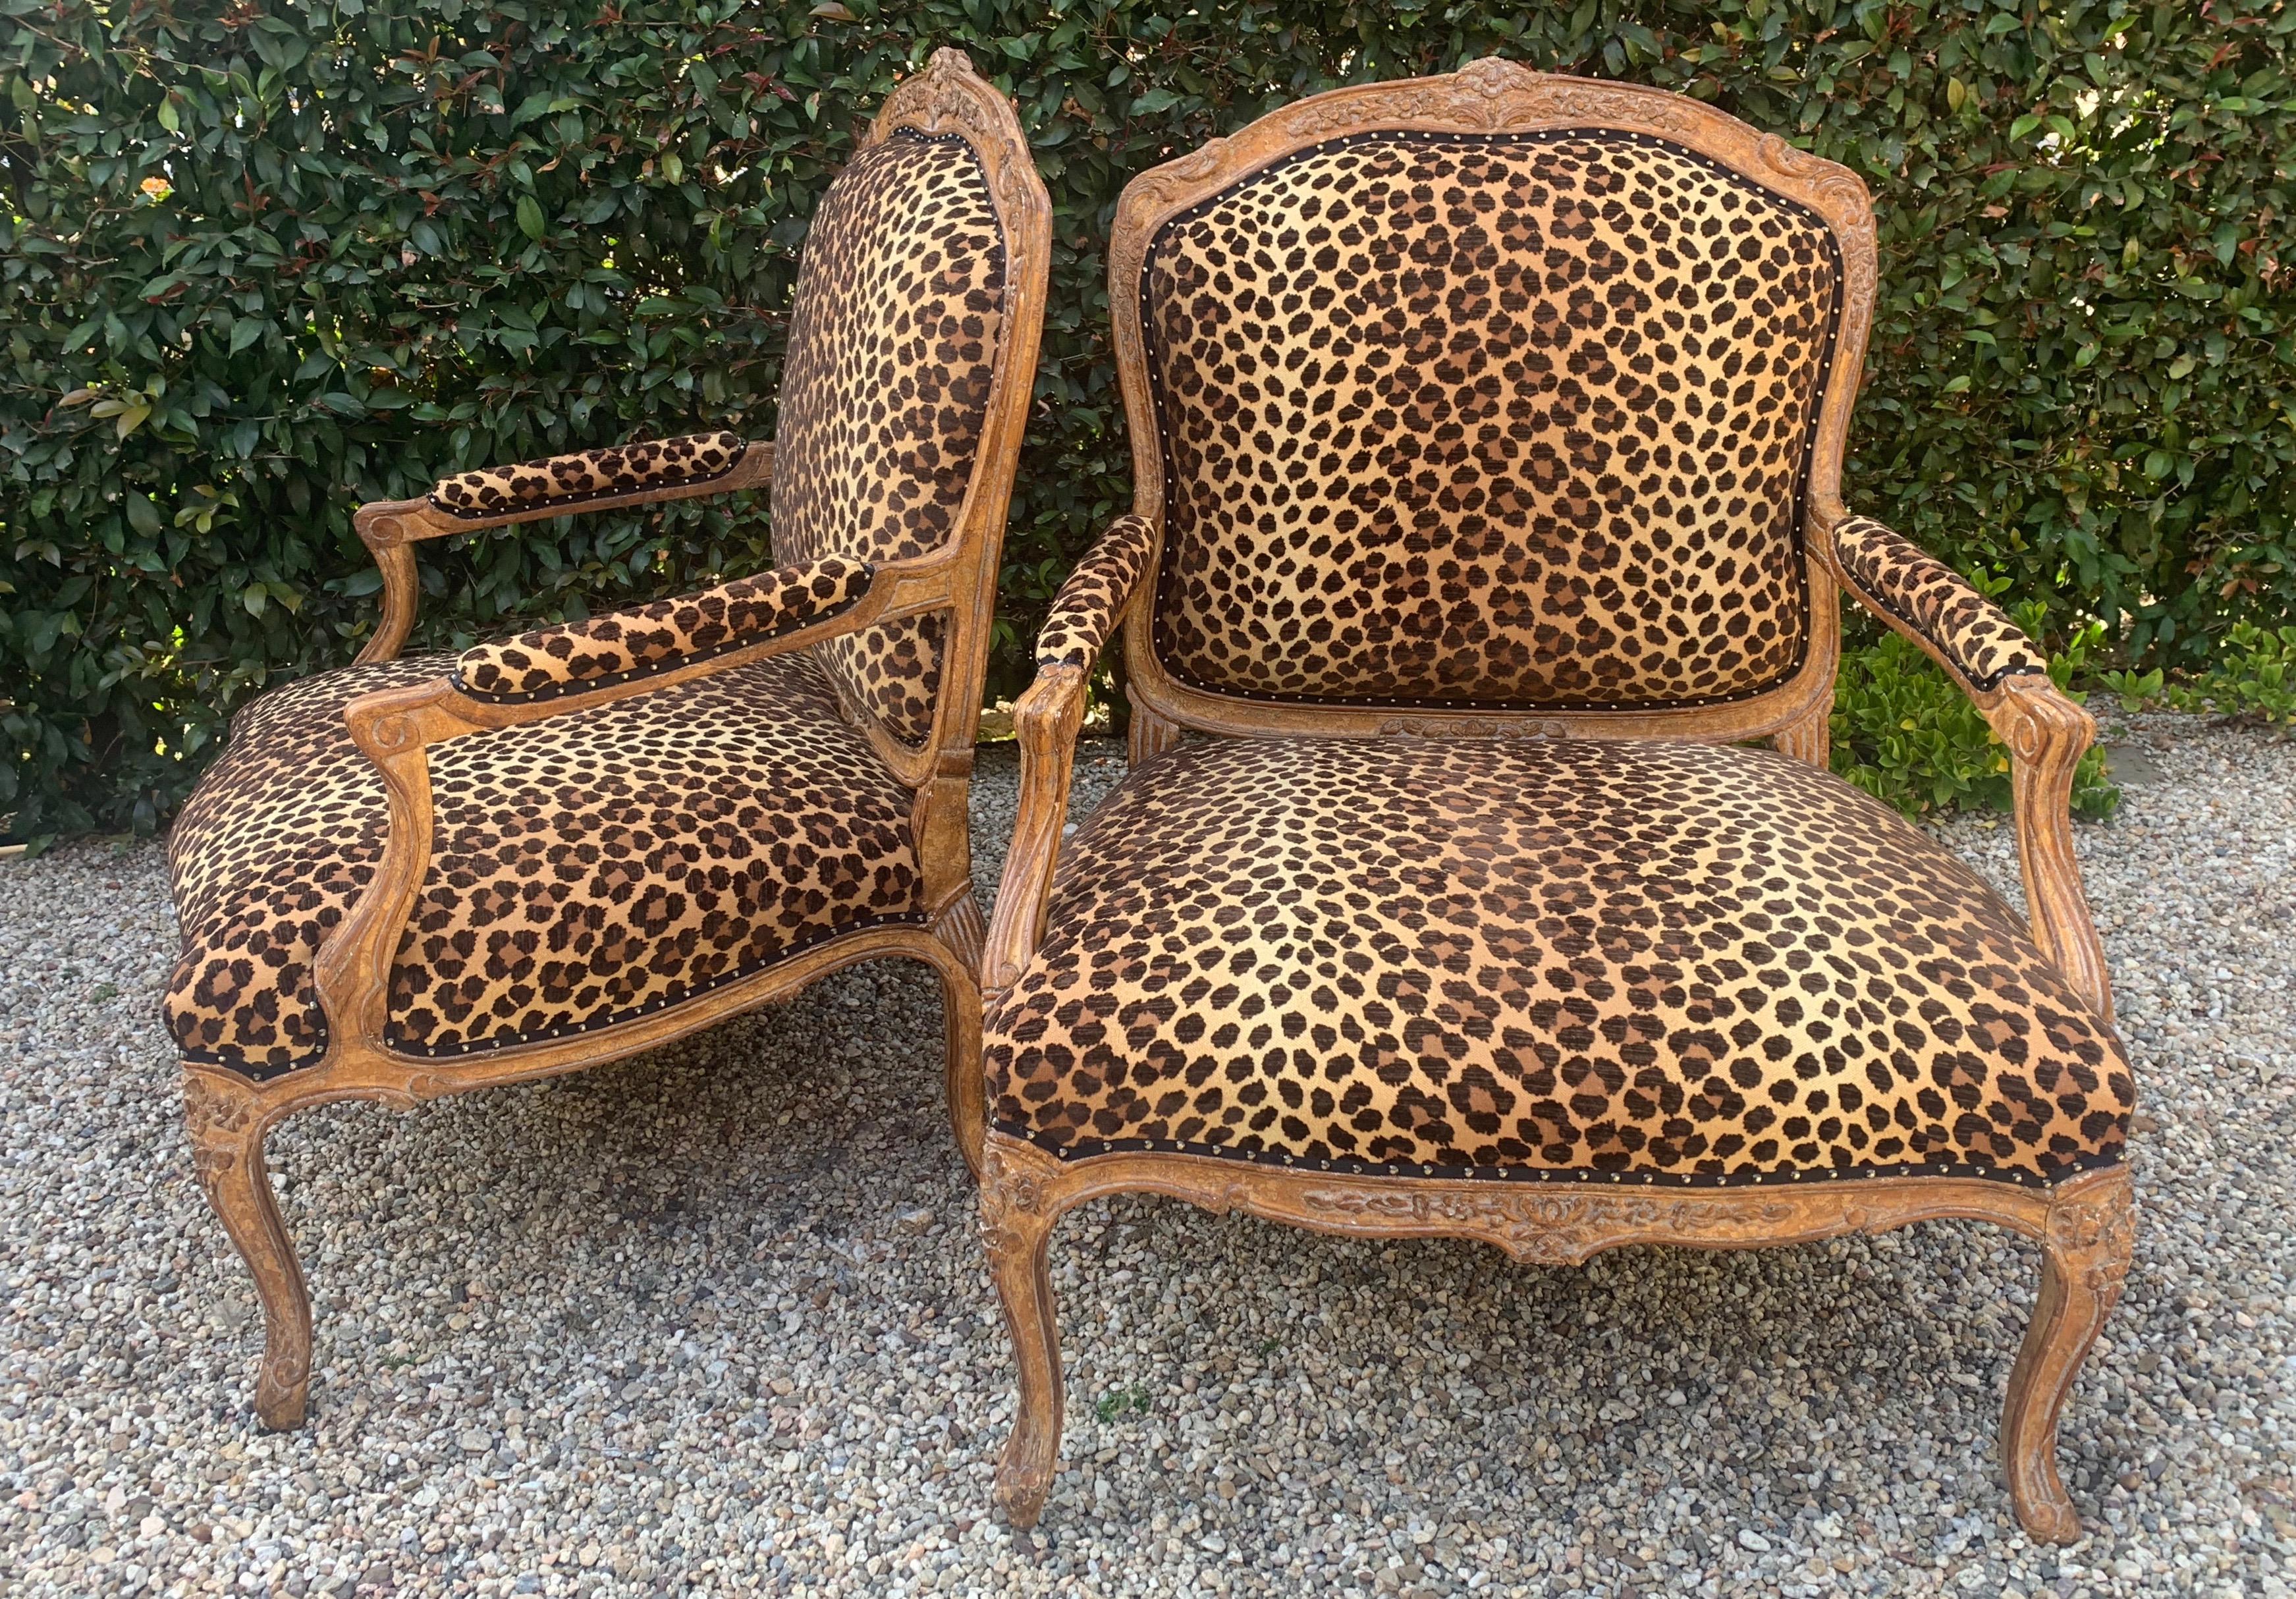 Pair of Fauteuils a la Reine in newly upholstered cut velvet leopard with a black ribbon gimp and nailheads. Extremely large and very comfortable.

Original frames manufactured in the late 20th century have a very sophisticated patinated